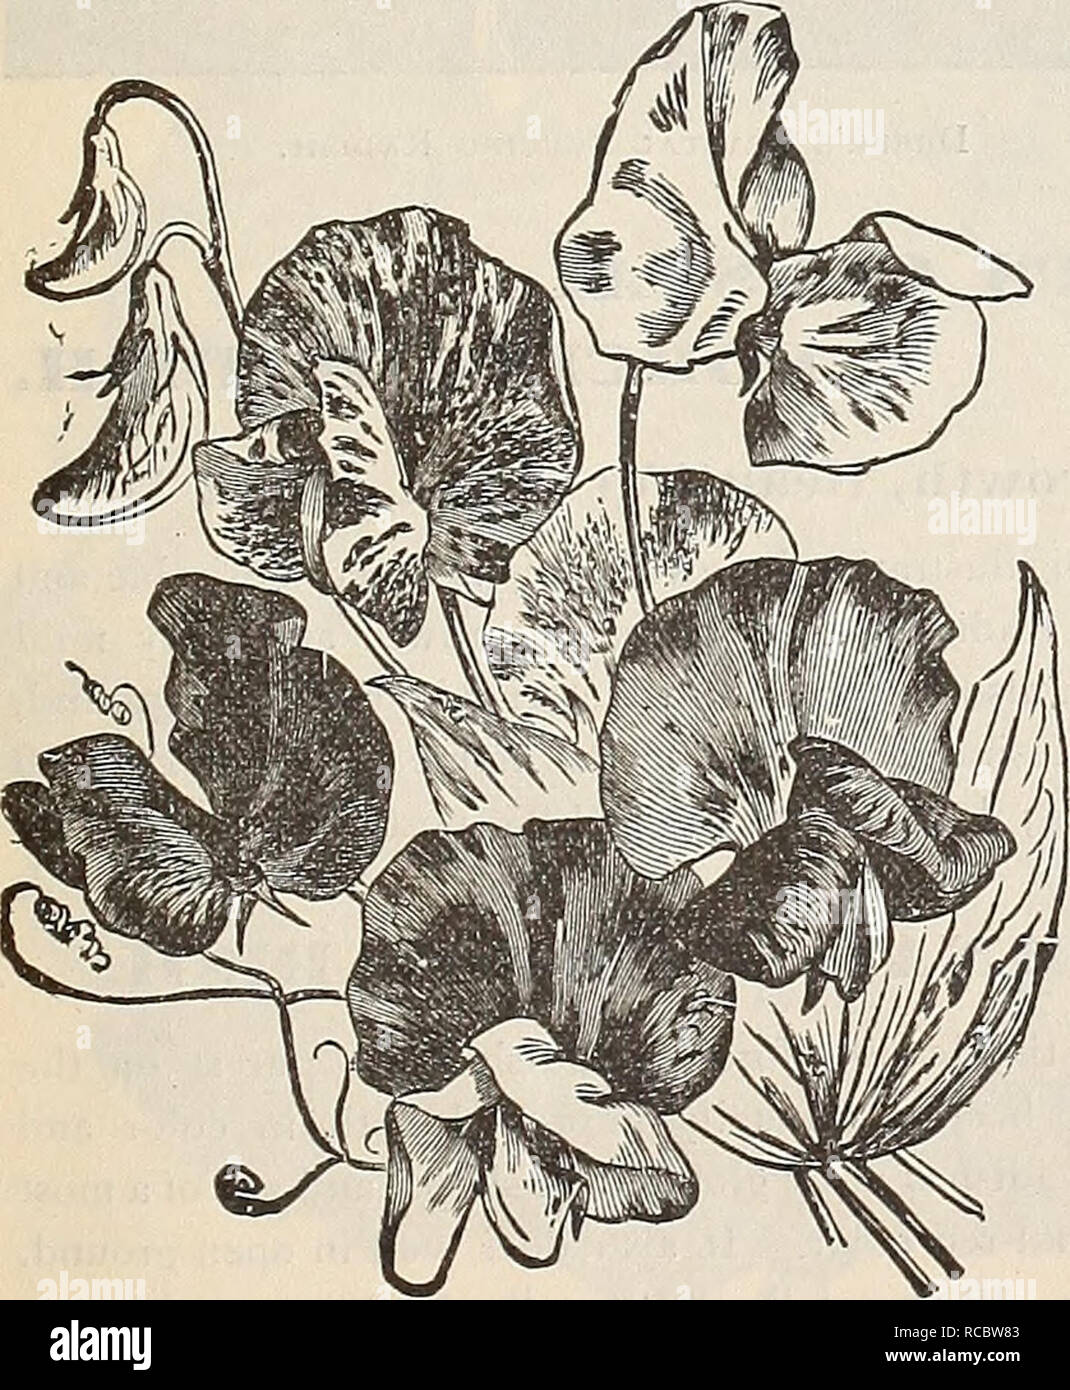 . Dreer's autumn 1901 catalogue. Bulbs (Plants) Catalogs; Flowers Seeds Catalogs; Gardening Equipment and supplies Catalogs; Nurseries (Horticulture) Catalogs; Fruit Seeds Catalogs. Bugnot's Superb Blotched Pansy. â âBracteatum. Large orange-scarlet. POLYANTHUS. English Mixed PYRETHKUM hybridum. Single mixed Double Mixed PRIMULA Obconica Grand- pkt. iflora Fimbriata â Floribunda. Yellow â Forbesi. Rose â Veris (Cowslip). Mixed colors â Vulgaris (English Primrose). Yellow PRIMULA sinensis fimbriata (Chinese Fringed). These charming and beautiful plants are indispensable for winter and spring de Stock Photo